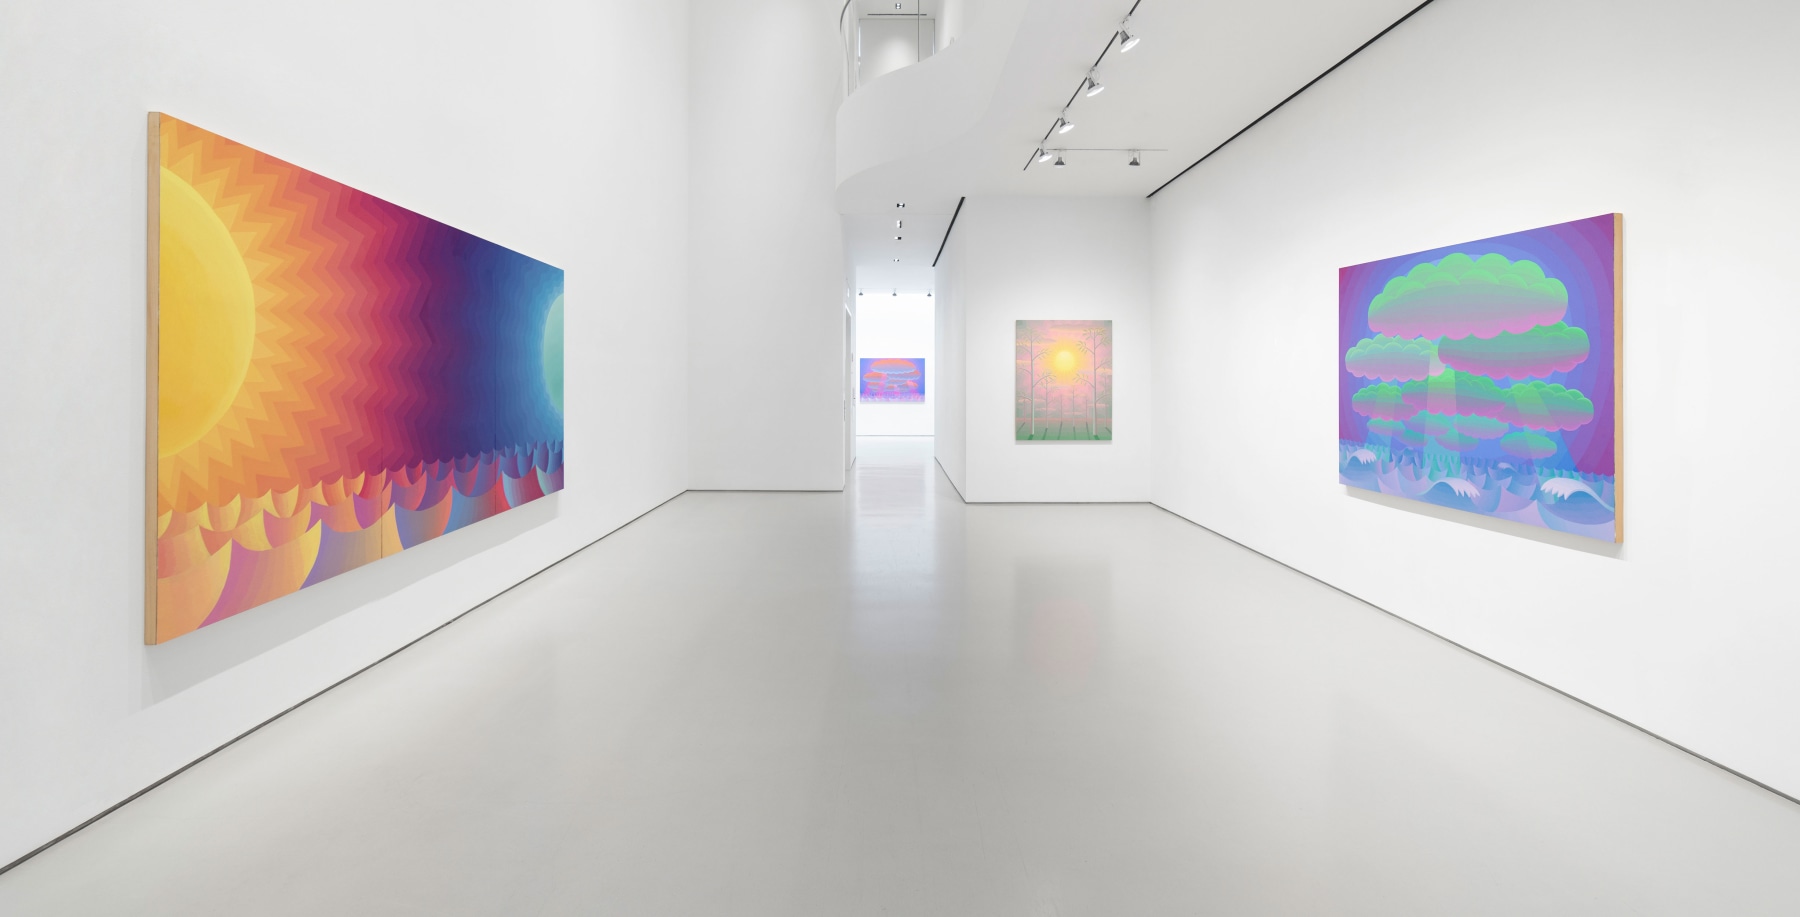 View of gallery with brightly colored landscape and seascape paintings in yellows, pinks, blues, and greens